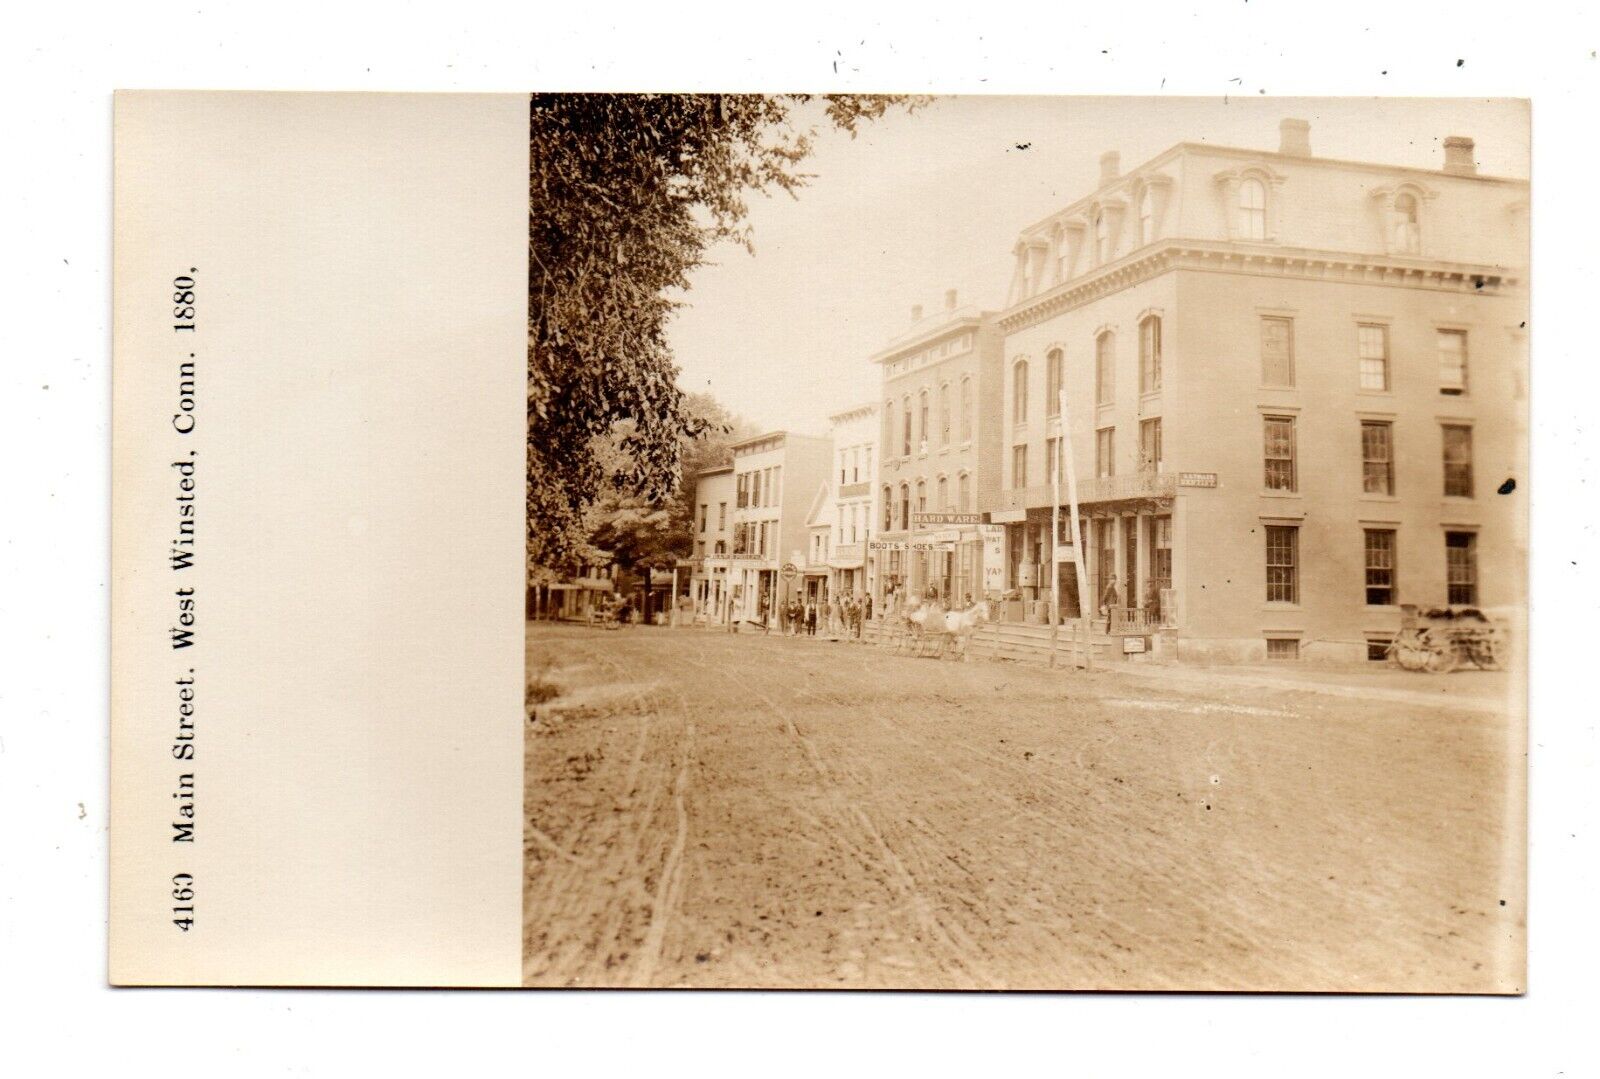 WEST WINSTED, CT 1880 MAIN STREET & CLARKE HOUSE DEMARS REAL PHOTO PC 1920-30s